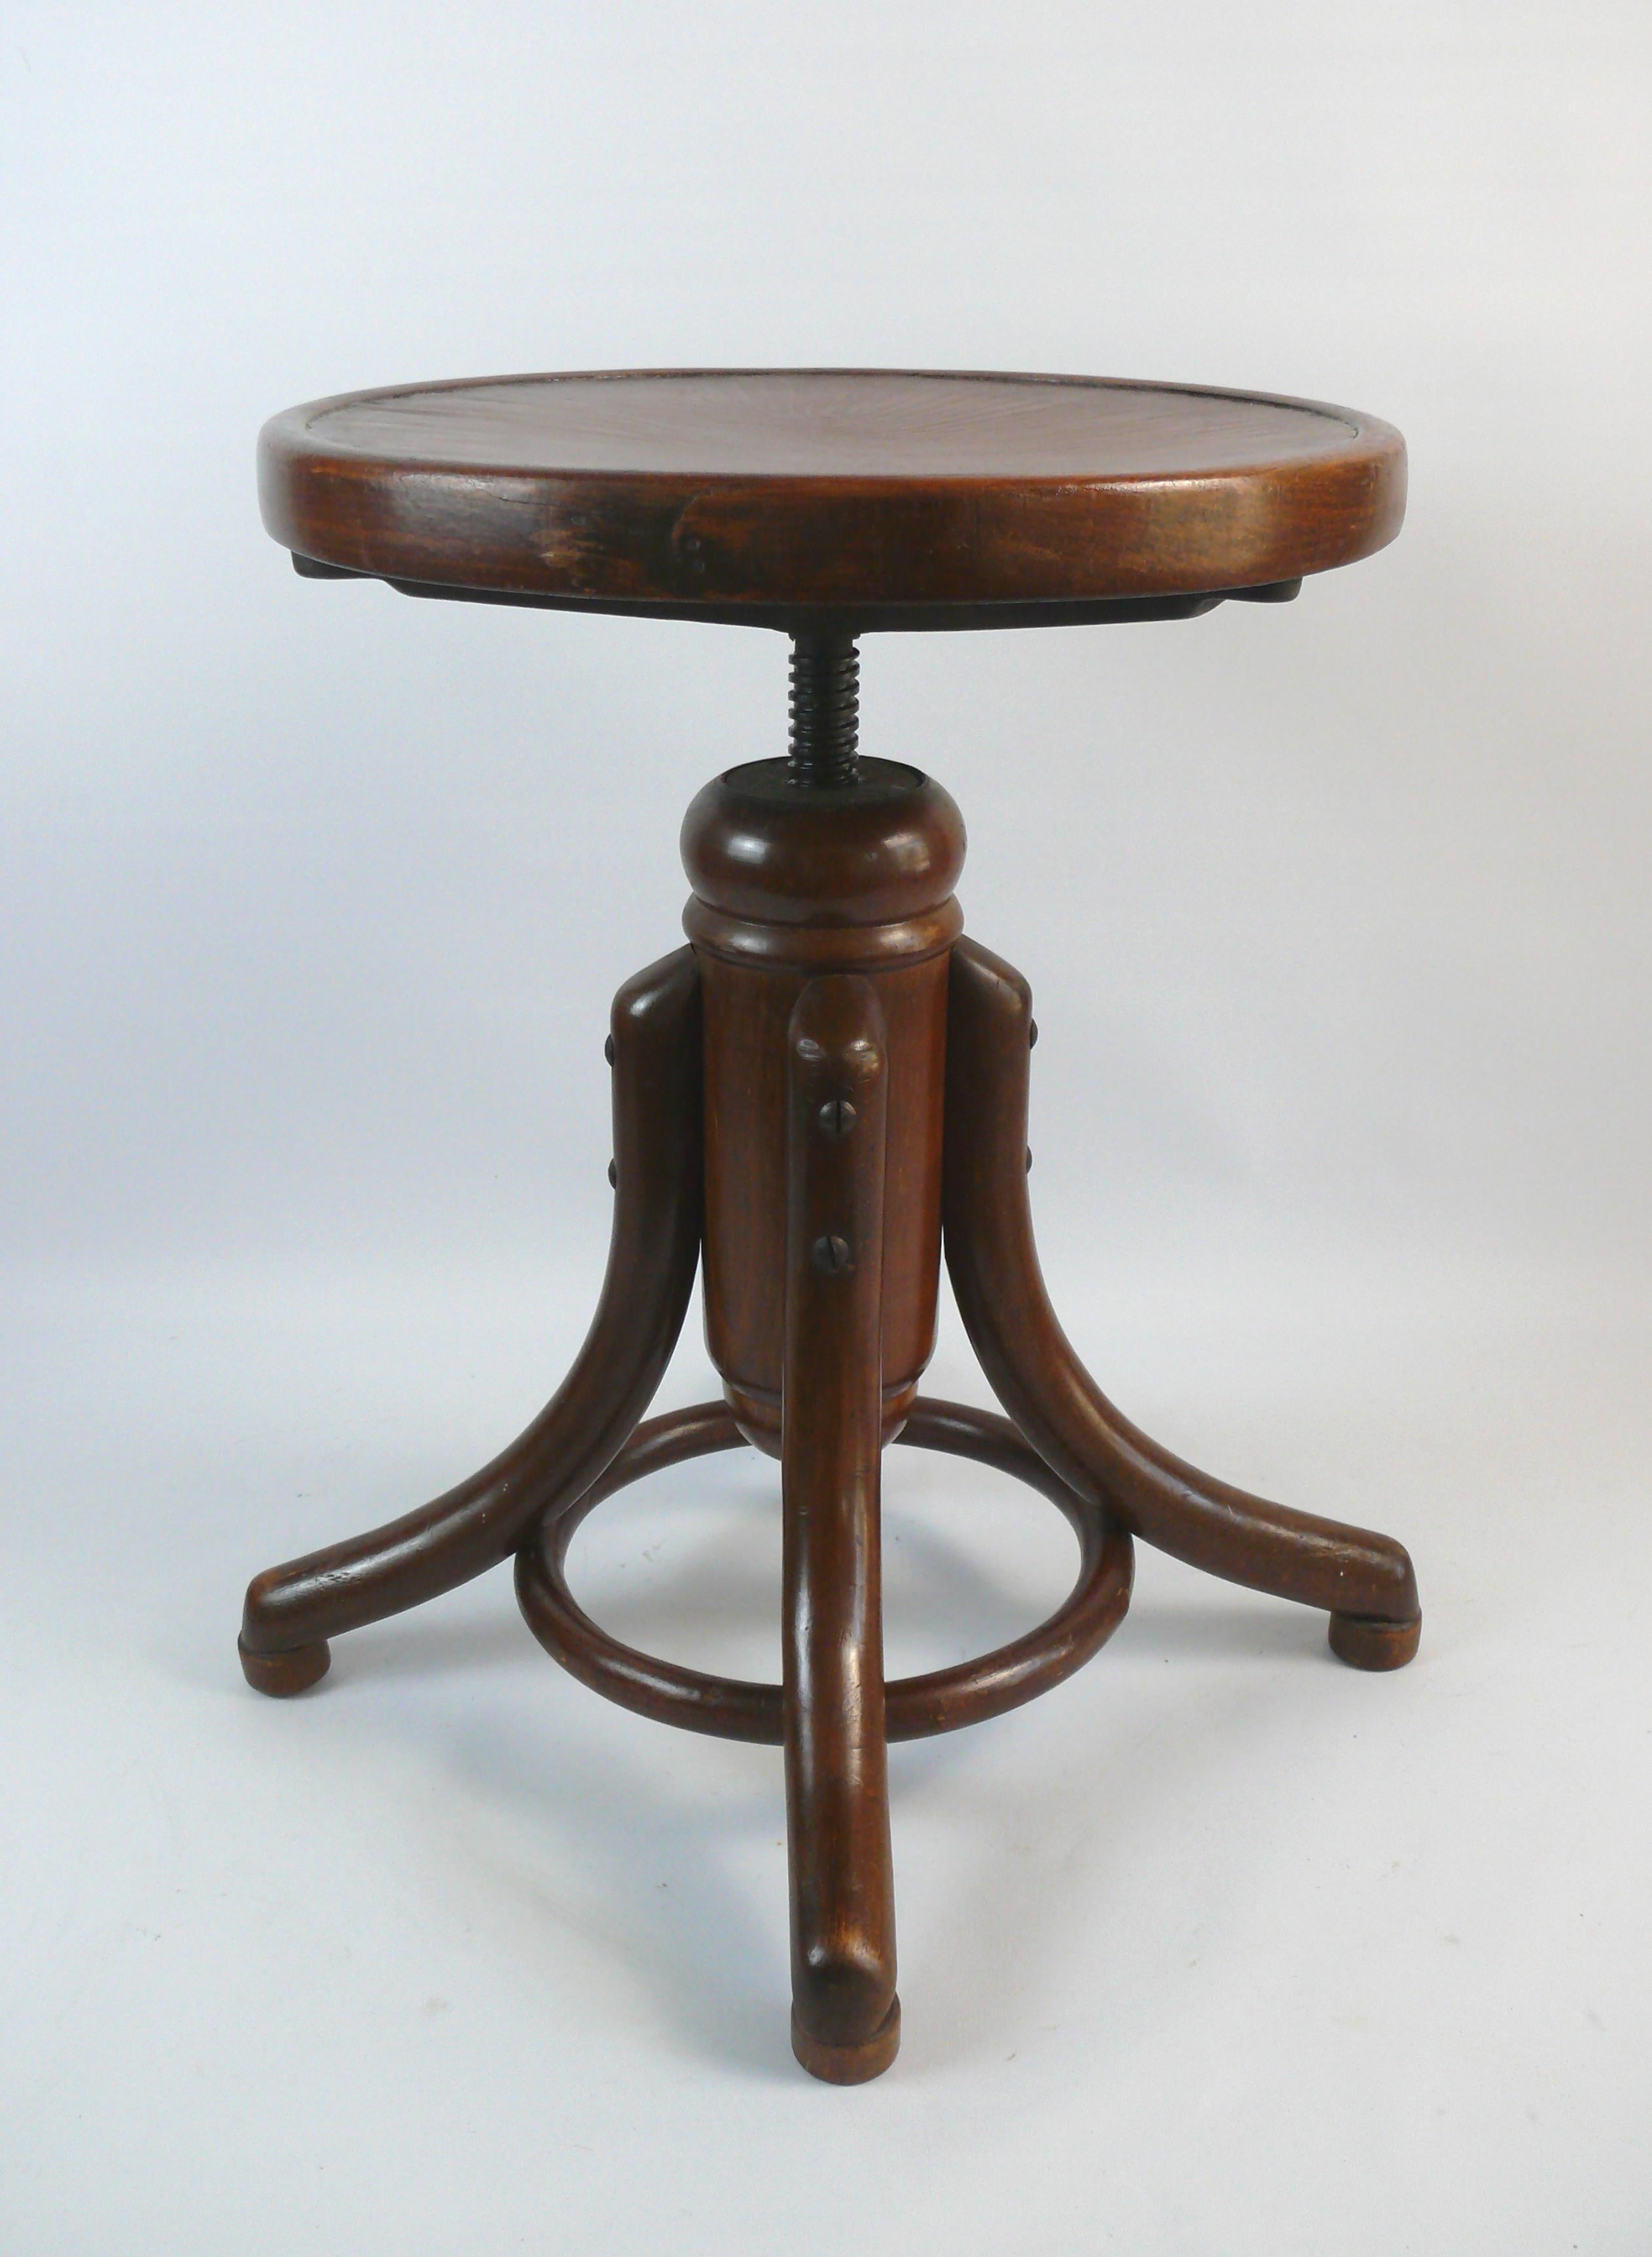 Antique piano stool/swivel stool by Gebrüder Thonet. The piano stool is made of stained and shellac-lacquered beech wood and has four steam-bent feet with a bentwood ring for stability. The stool can be adjusted in height from 46 cm to approx. 65